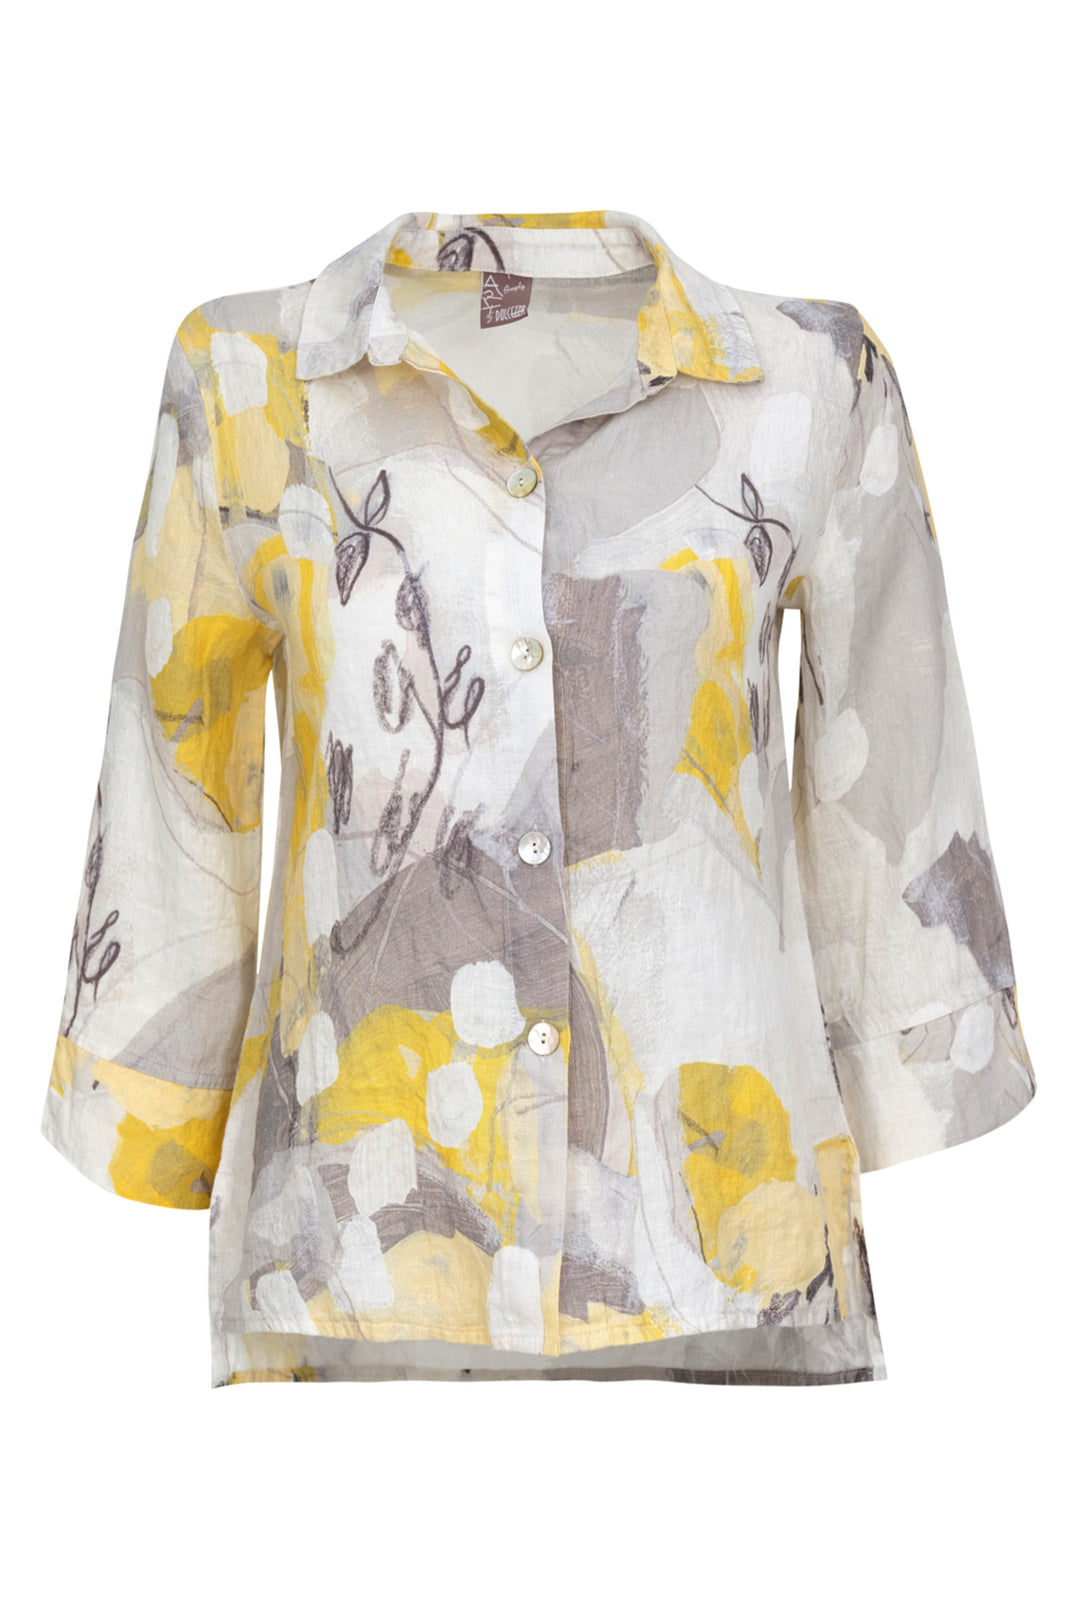 DOLCEZZA SPRING '23 women's casual yellow printed loose linen blouse